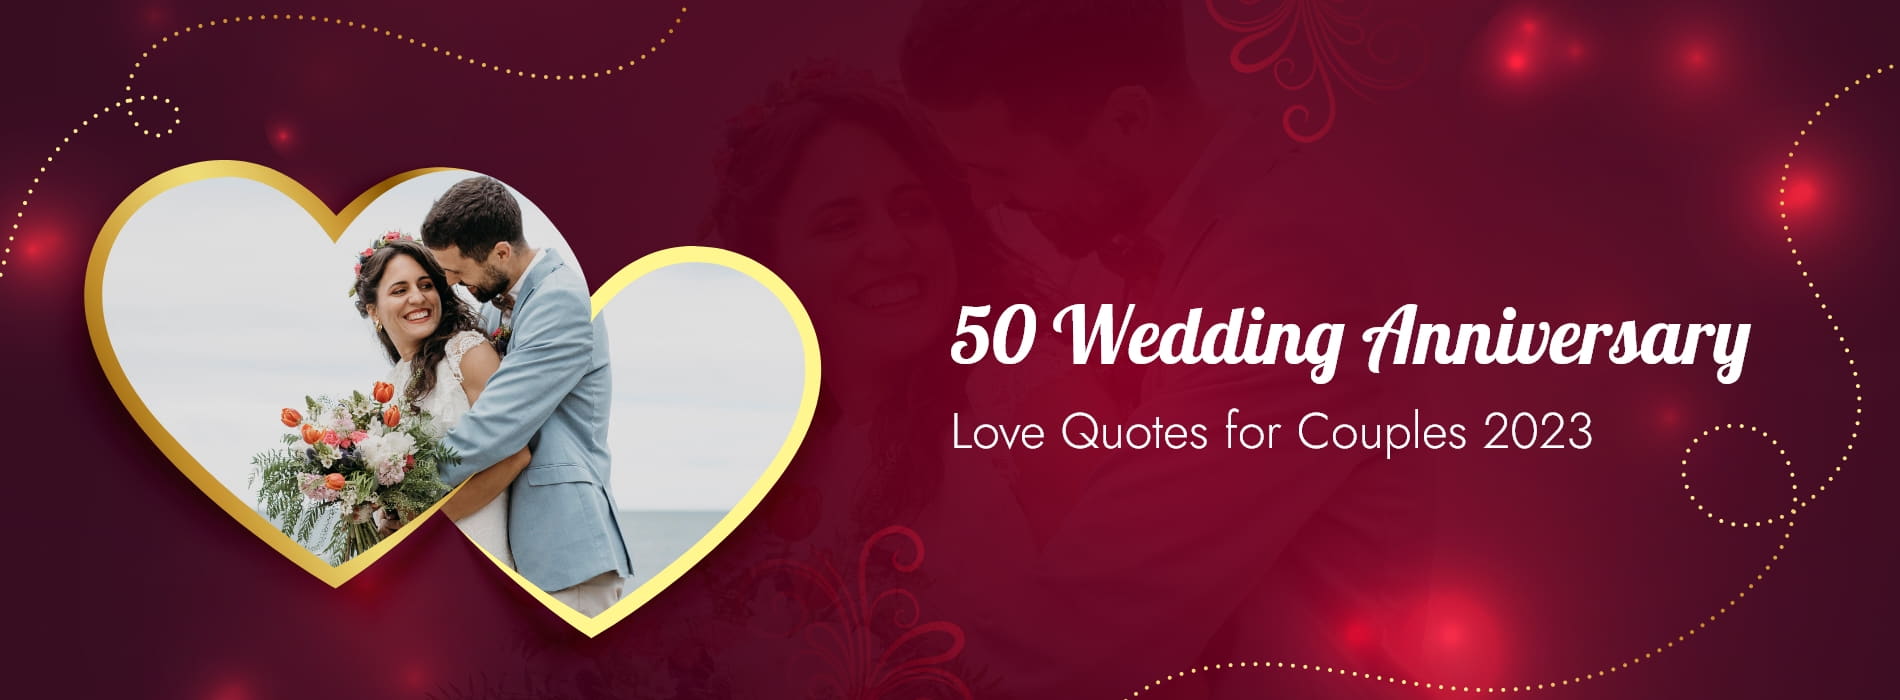 50-Wedding-Anniversary-Love-Quotes-for-Couples-Viraasi